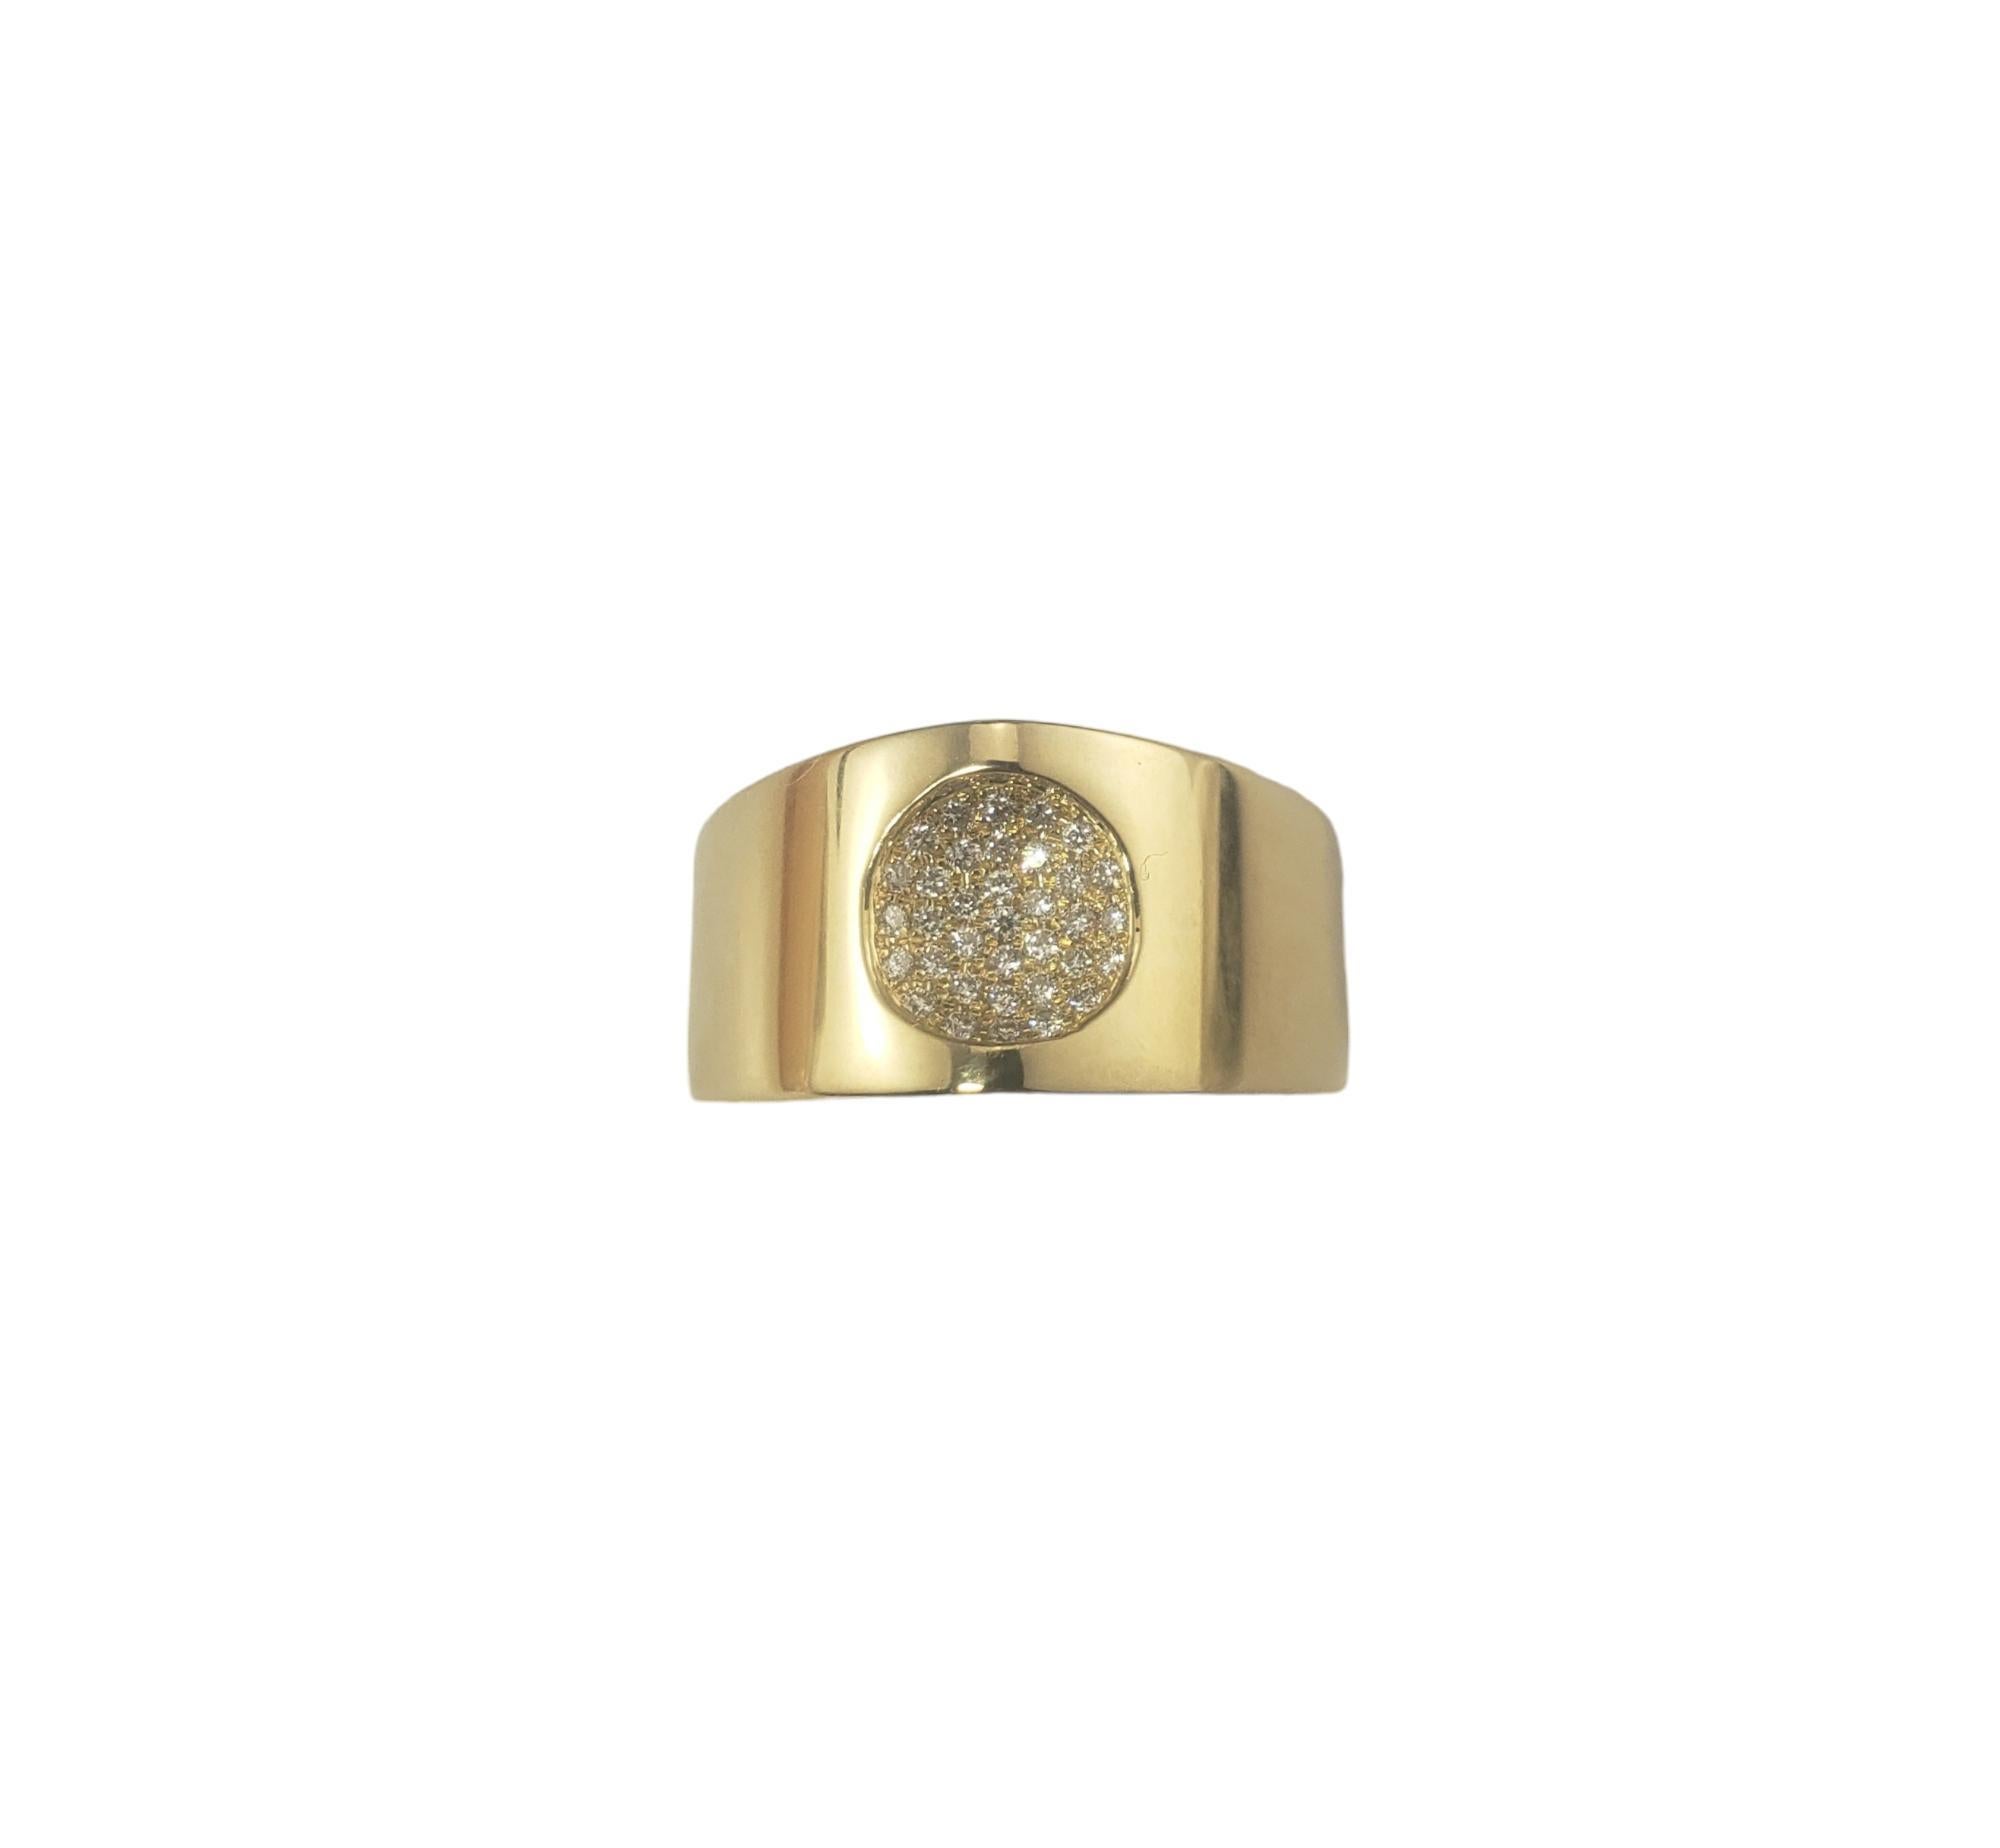 Movado 18 Karat Yellow Gold and Diamond Ring Size 7.5 #16809 For Sale